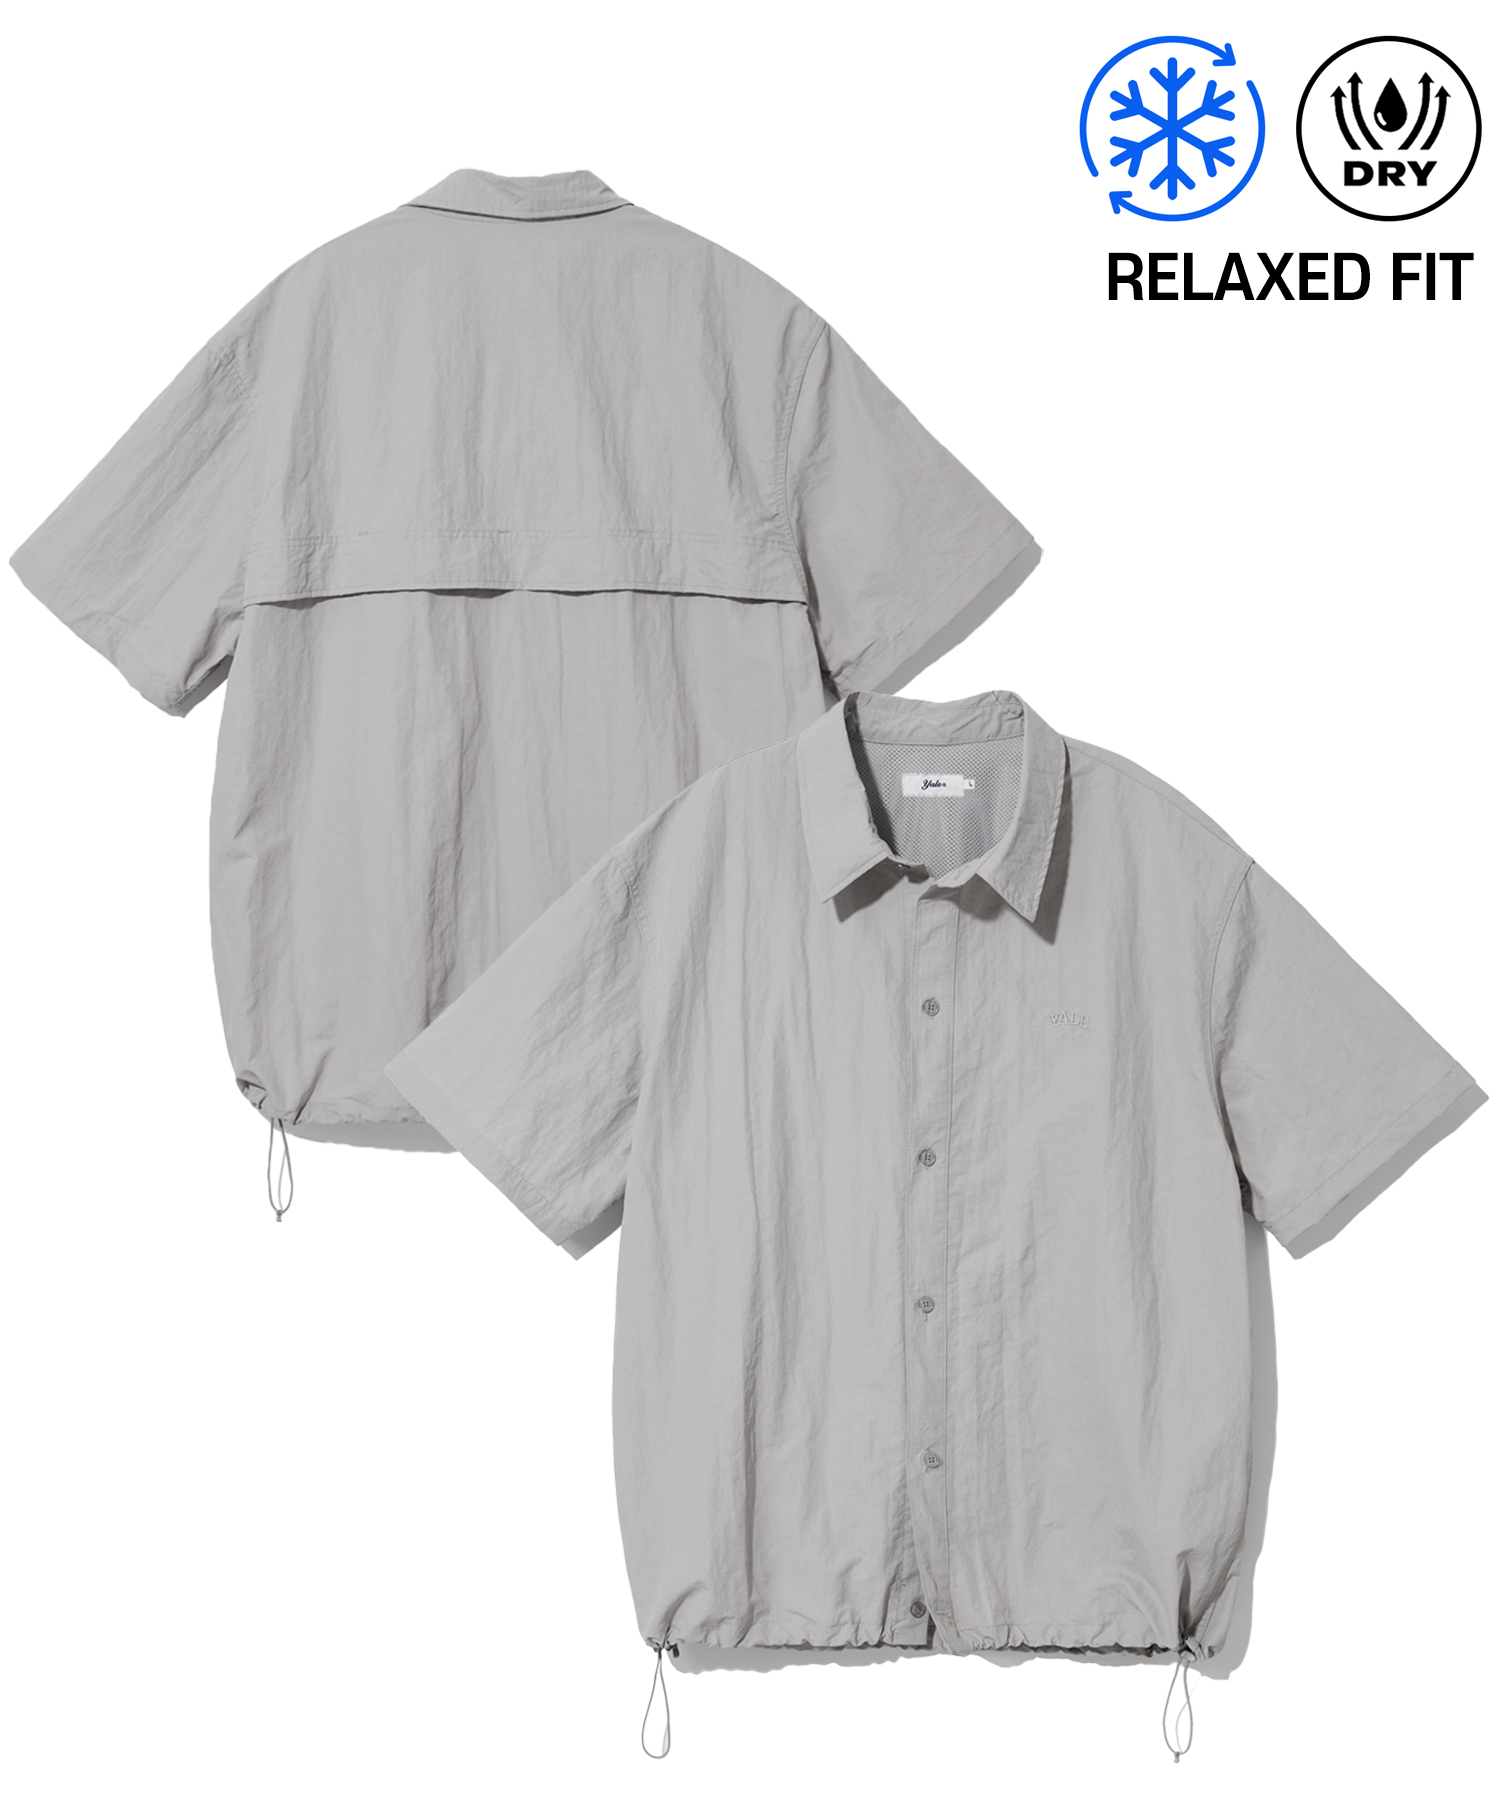 [ONEMILE WEAR] NYLON RELAXED FIT COACH SHIRT LIGHT GRAY